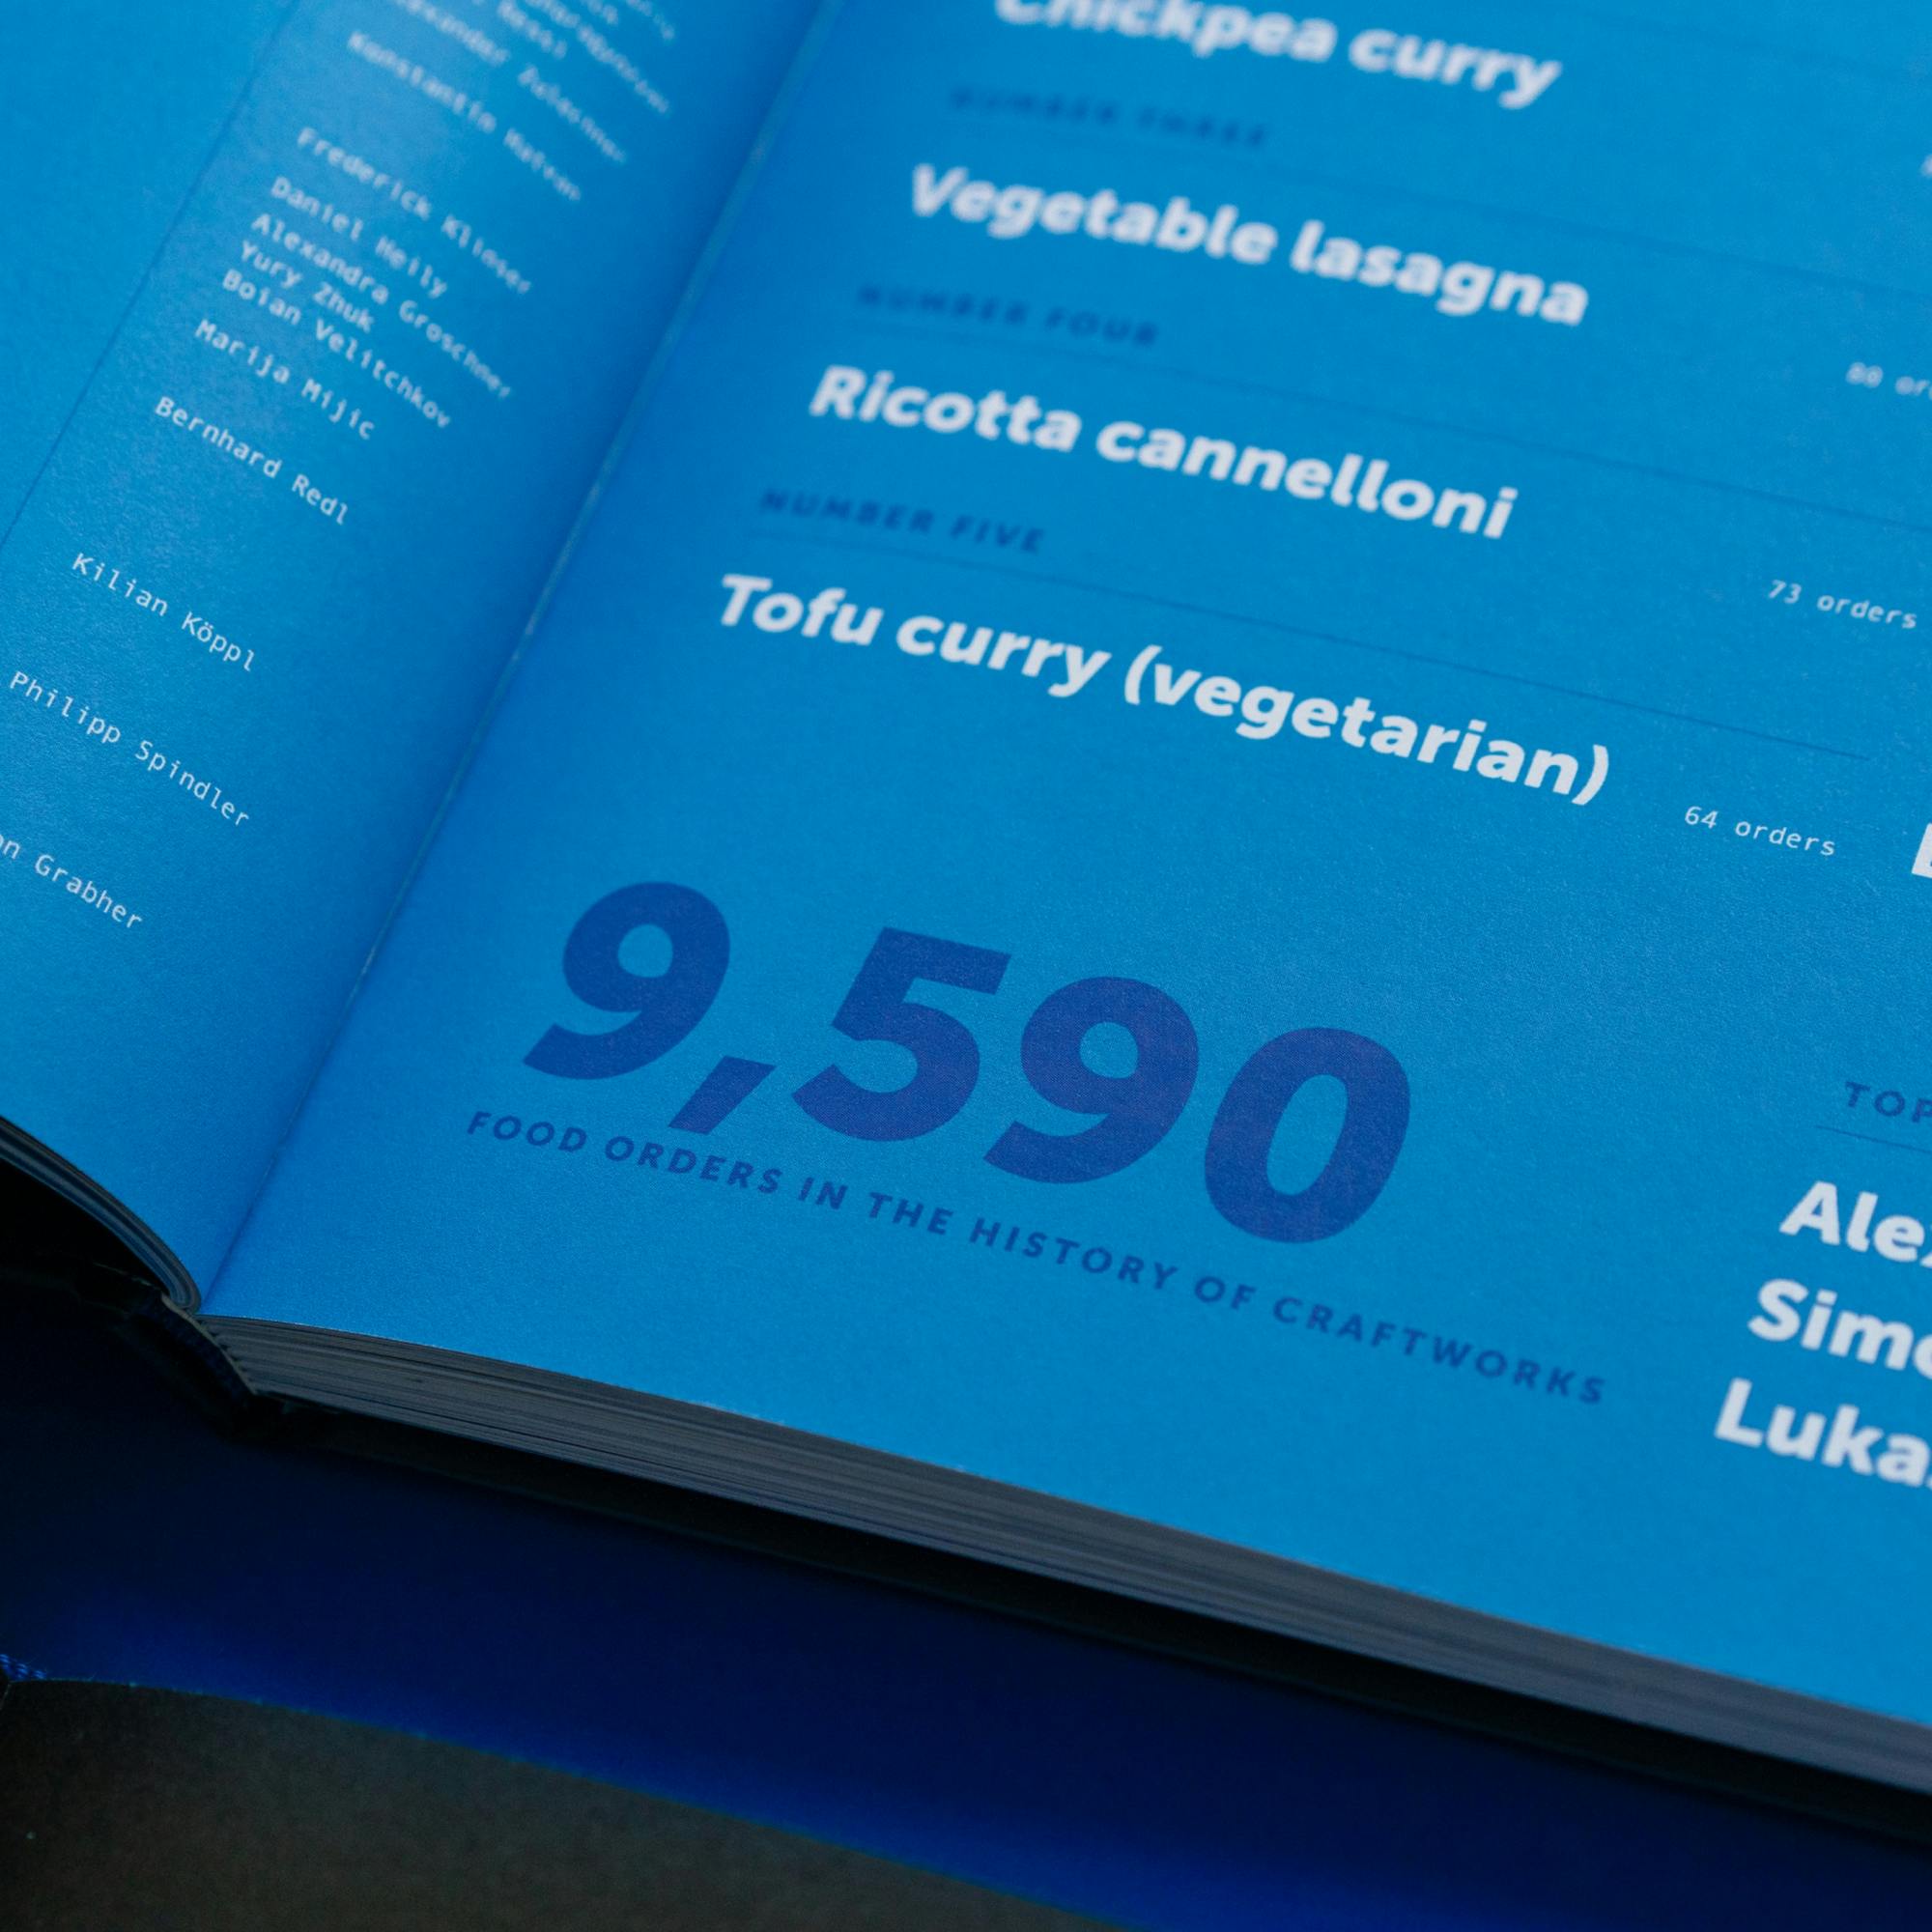 Detailaufnahme: Total Food Orders in the History of craftworks, 9.590 © goodmatters